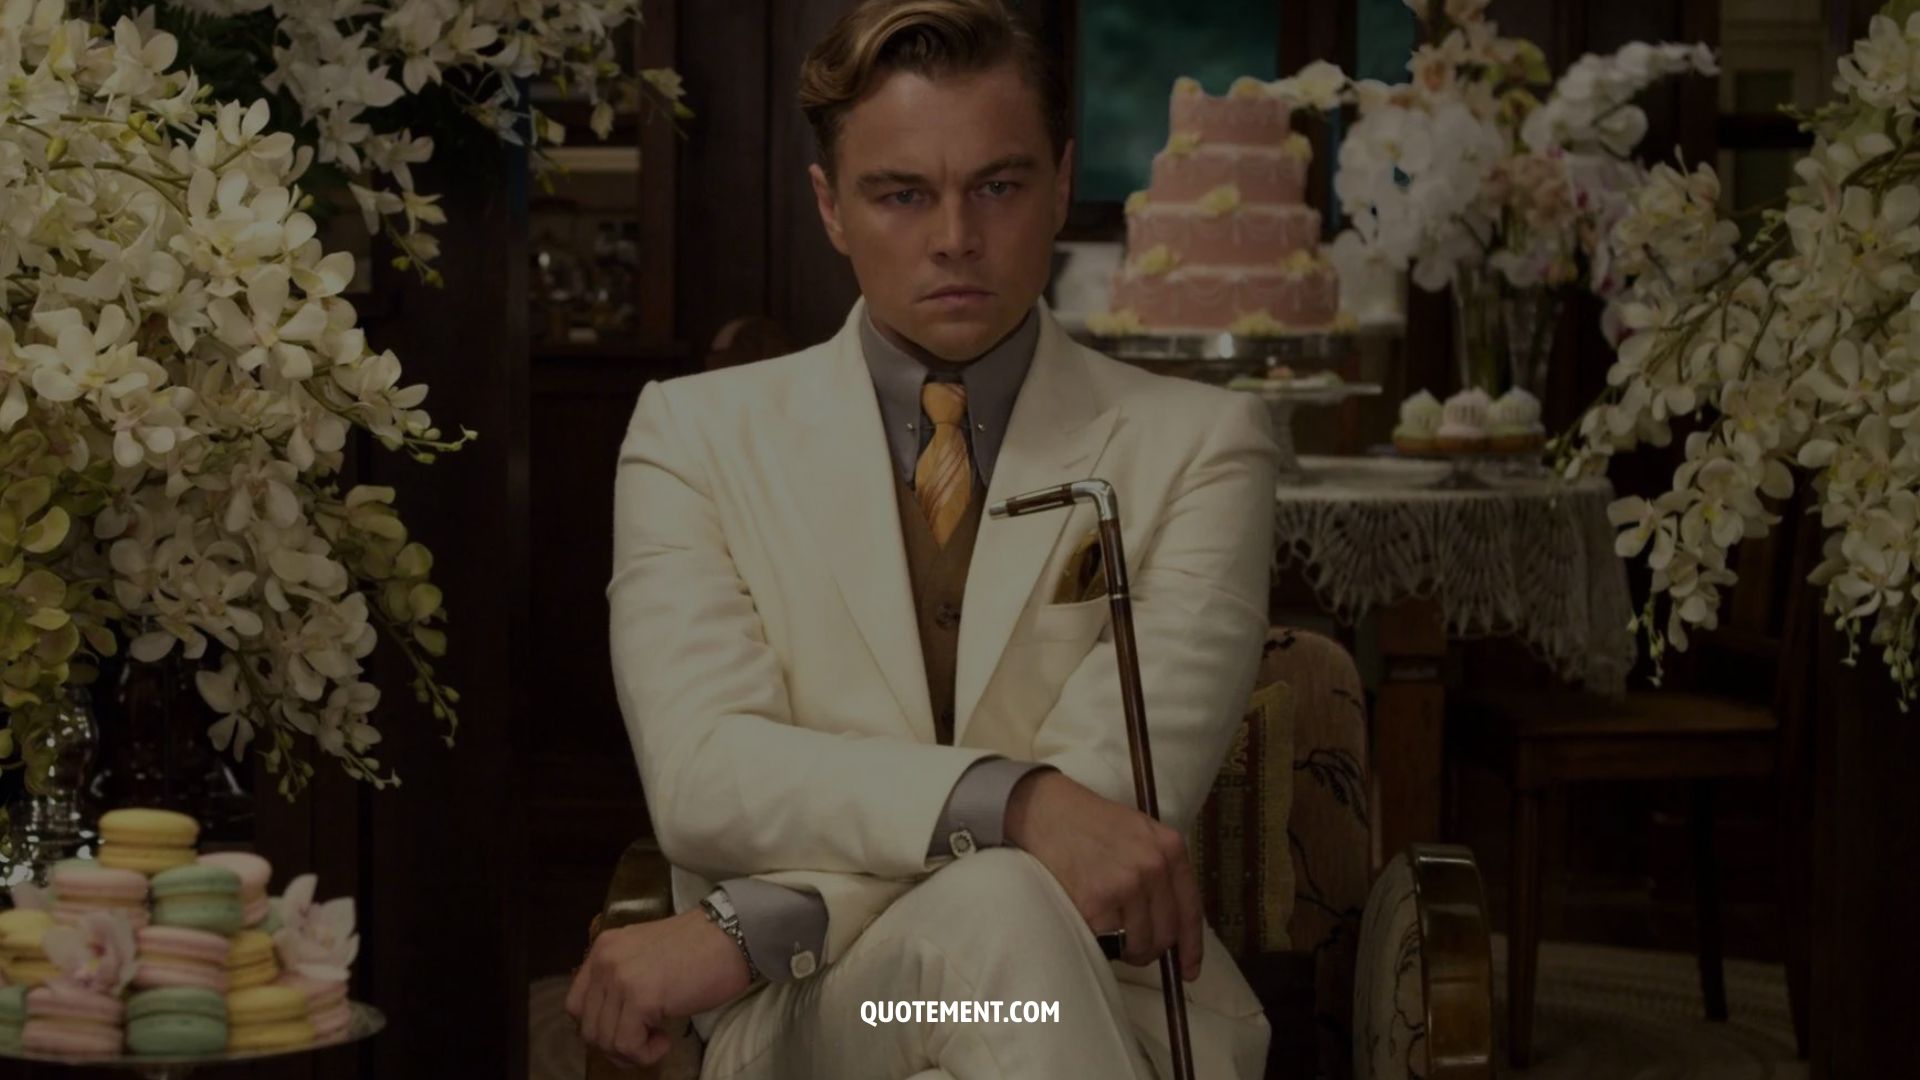 great gatsby quotes